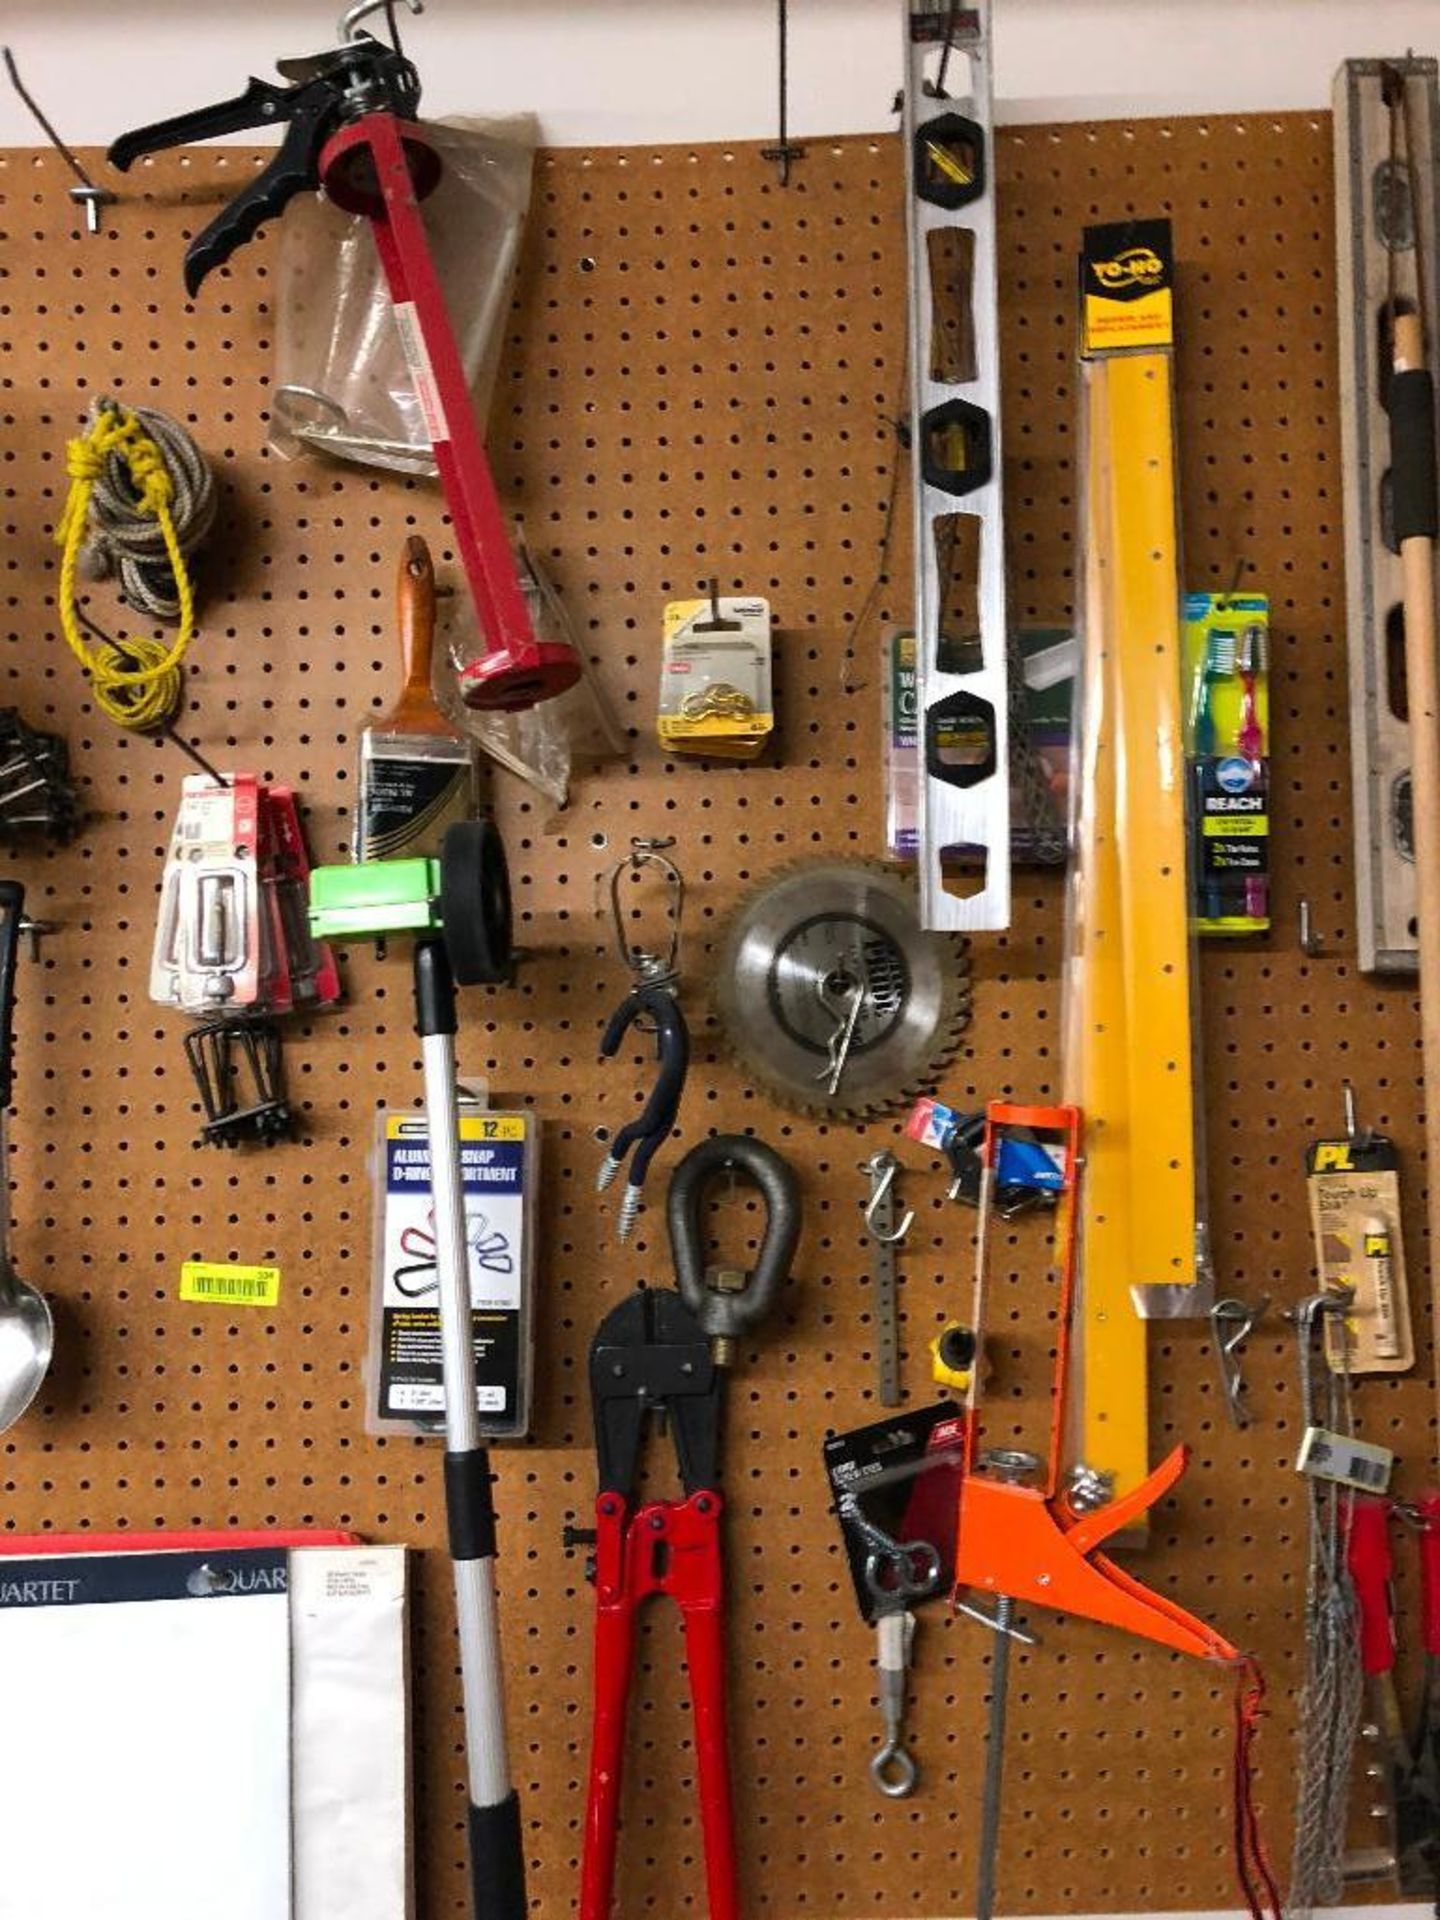 DESCRIPTION CONTENTS OF PEGBOARD (ASSORTED TOOLS AS SHOWN) LOCATION TOOL ROOM: RIGHT SIDE ROOM THIS - Image 3 of 4